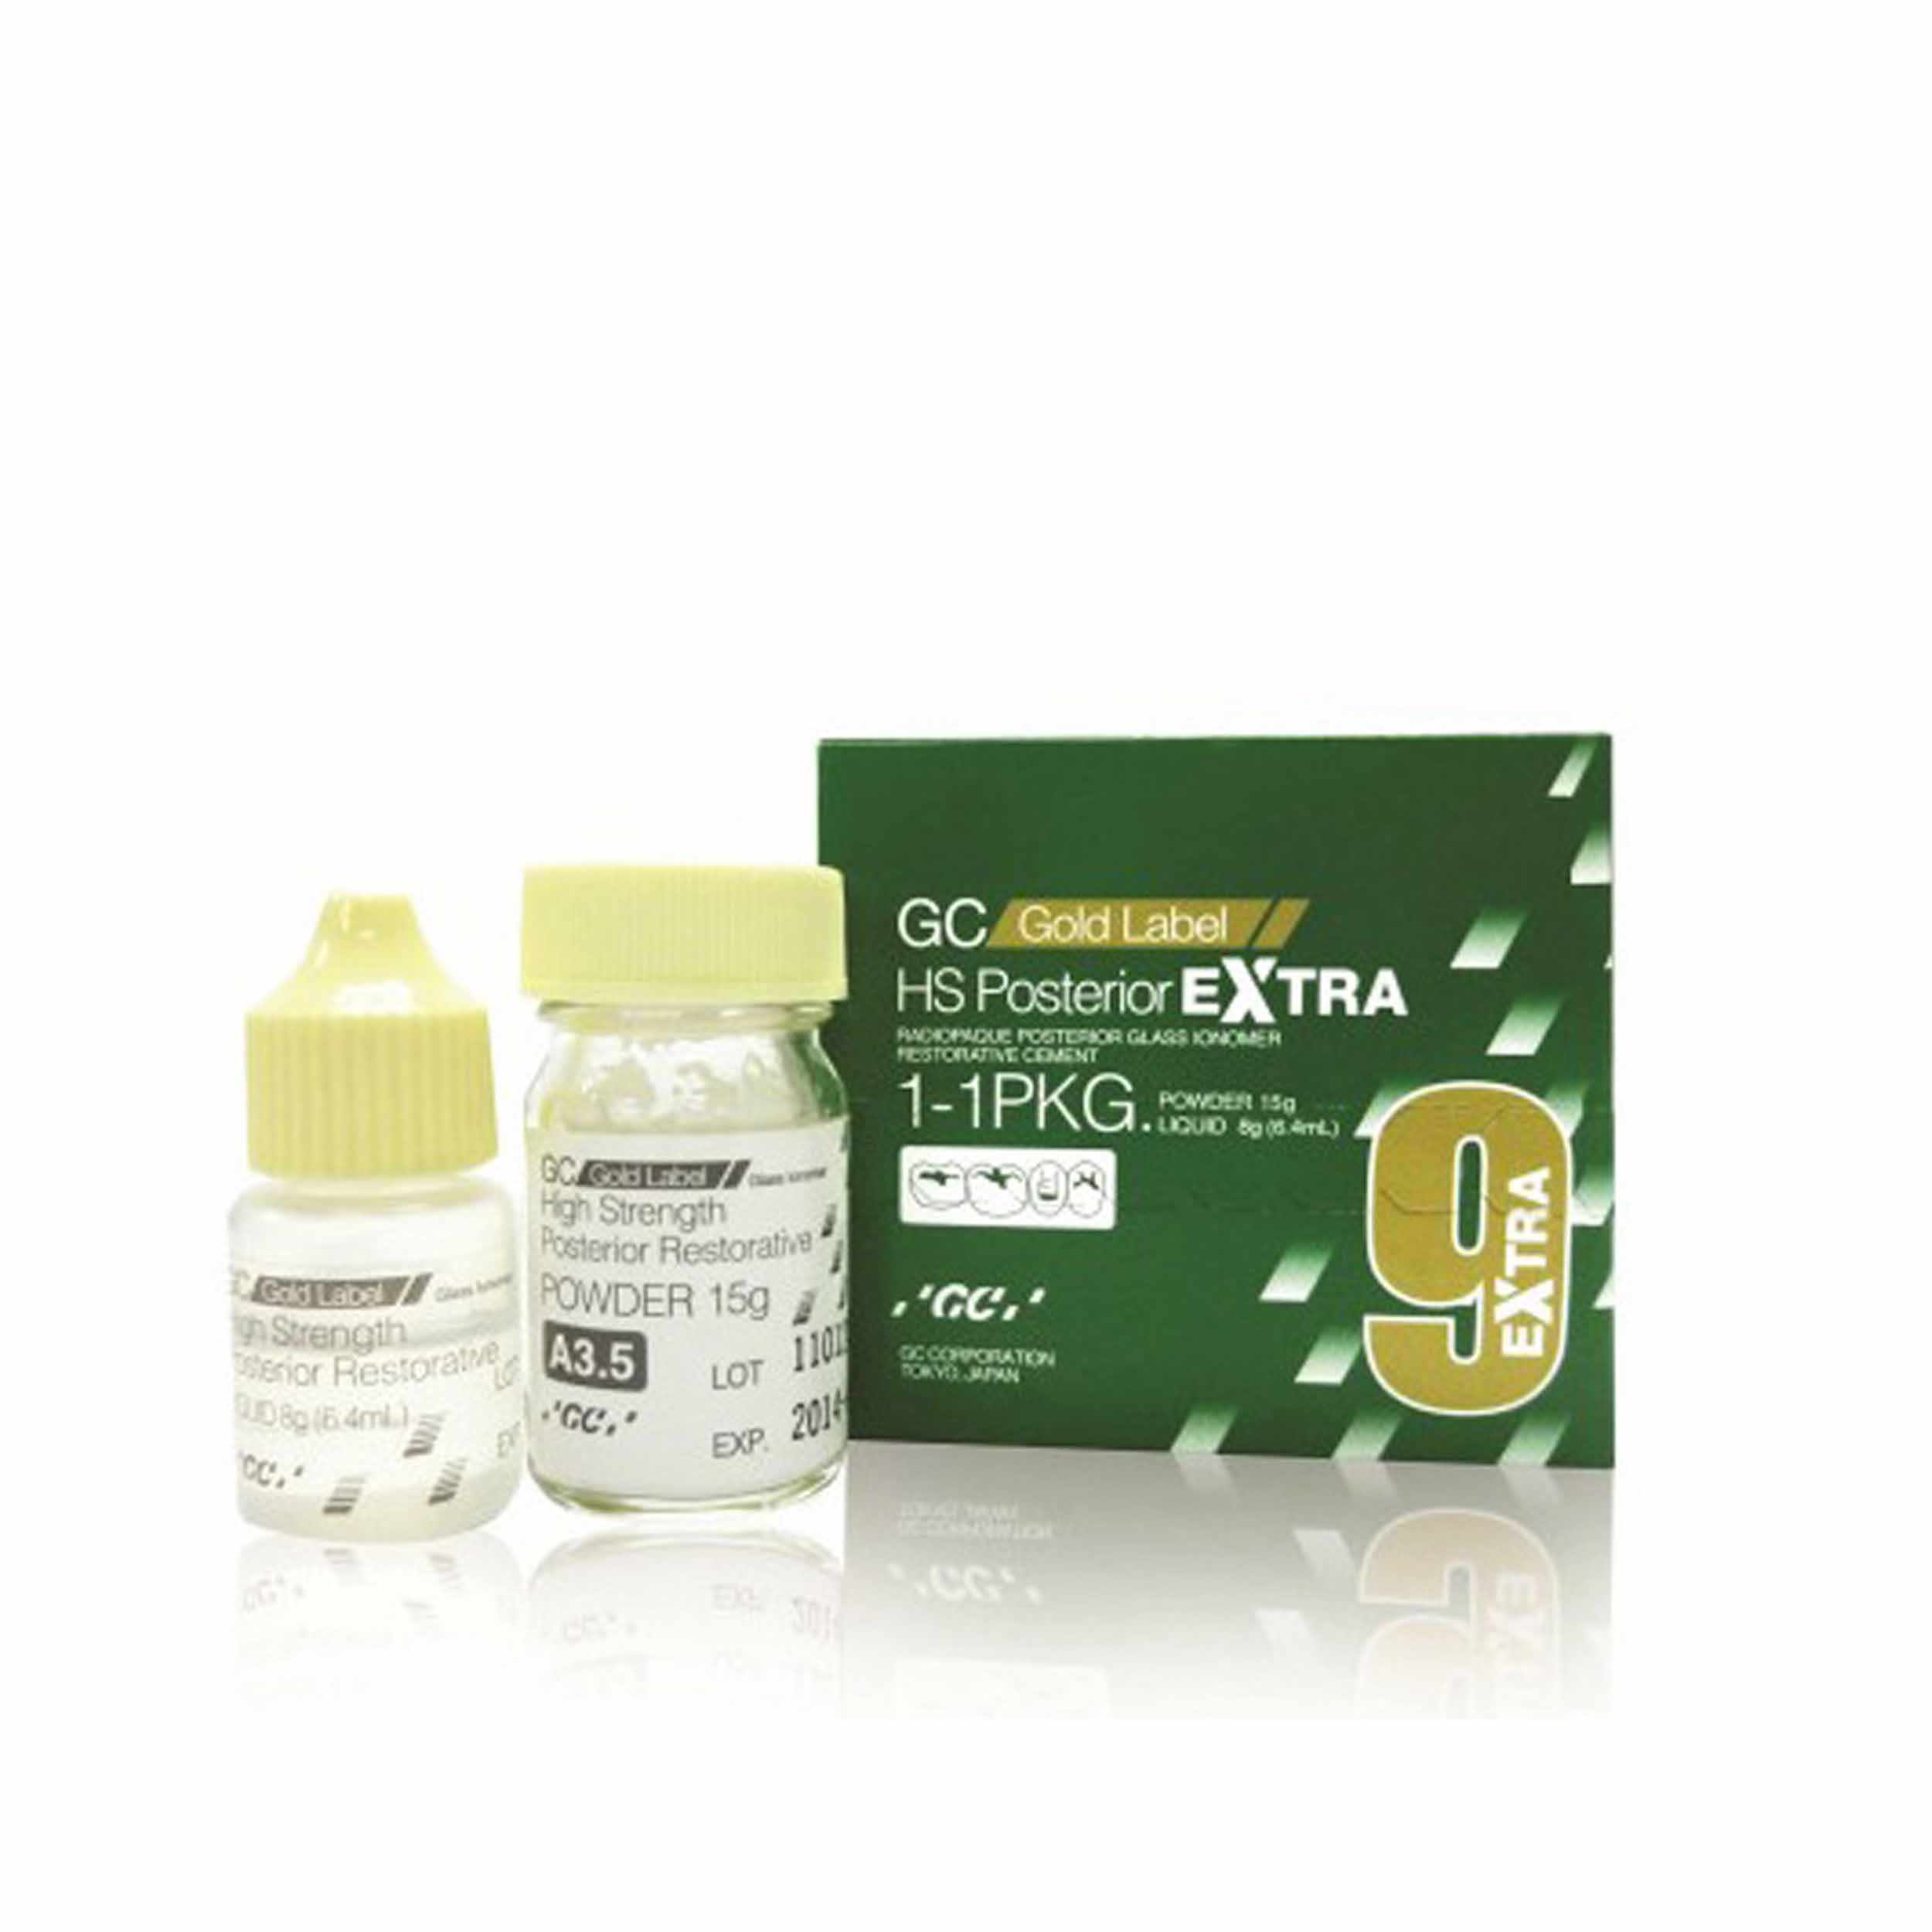 GC Gold Label Type 9 Extra Posterior GI Cement